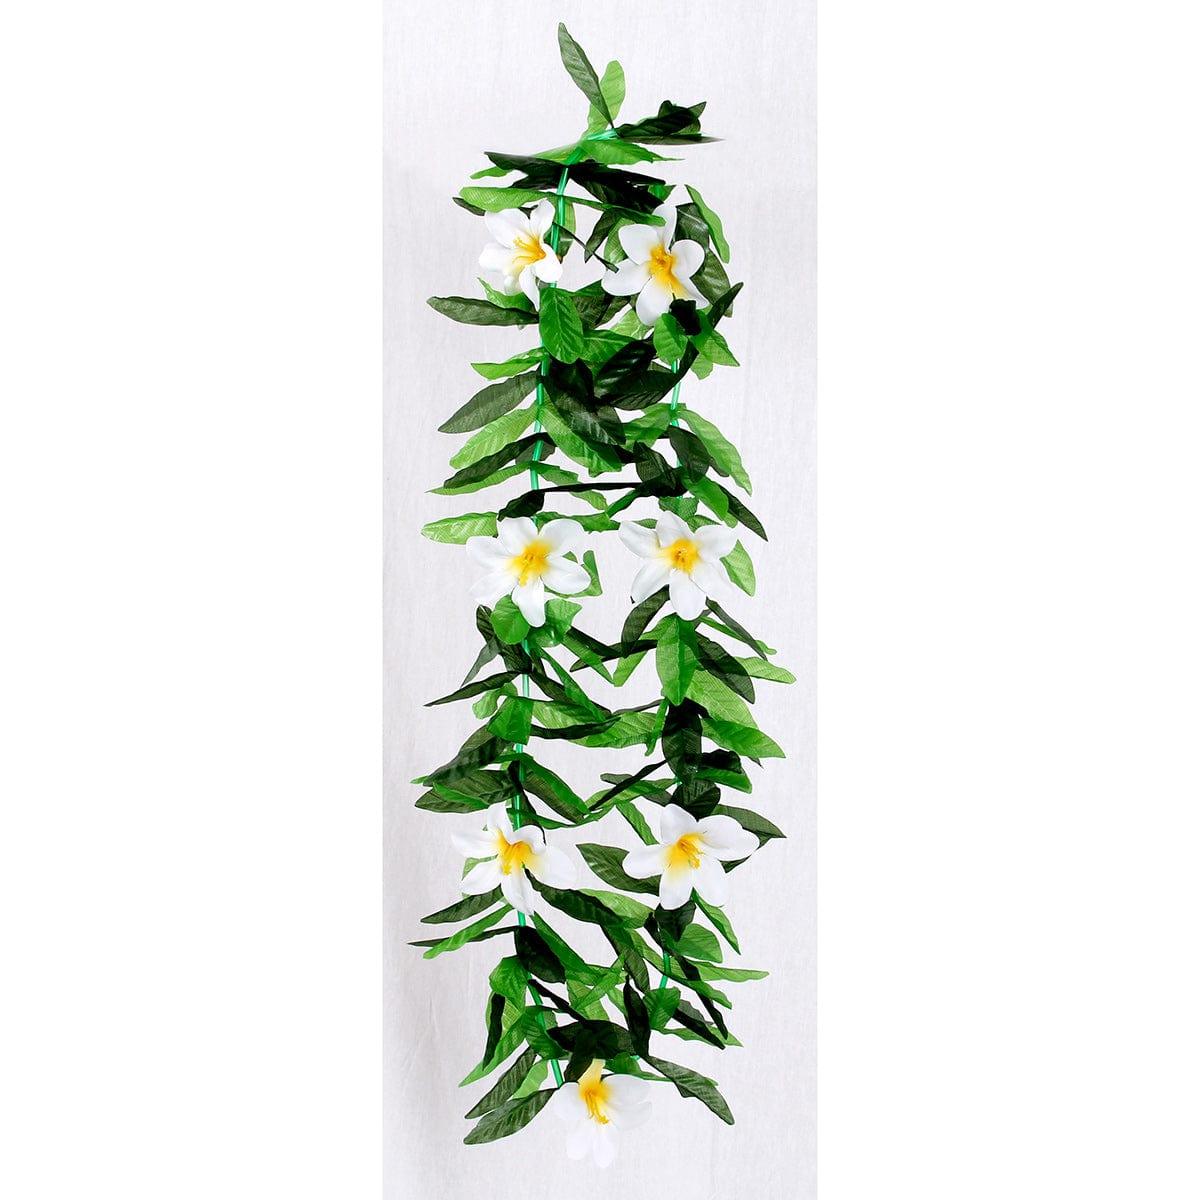 LIANGSHAN DAJIN GIFTS & TOYS CO LTD Theme Party Honolulu Flower Lei Necklace with Leaves, White